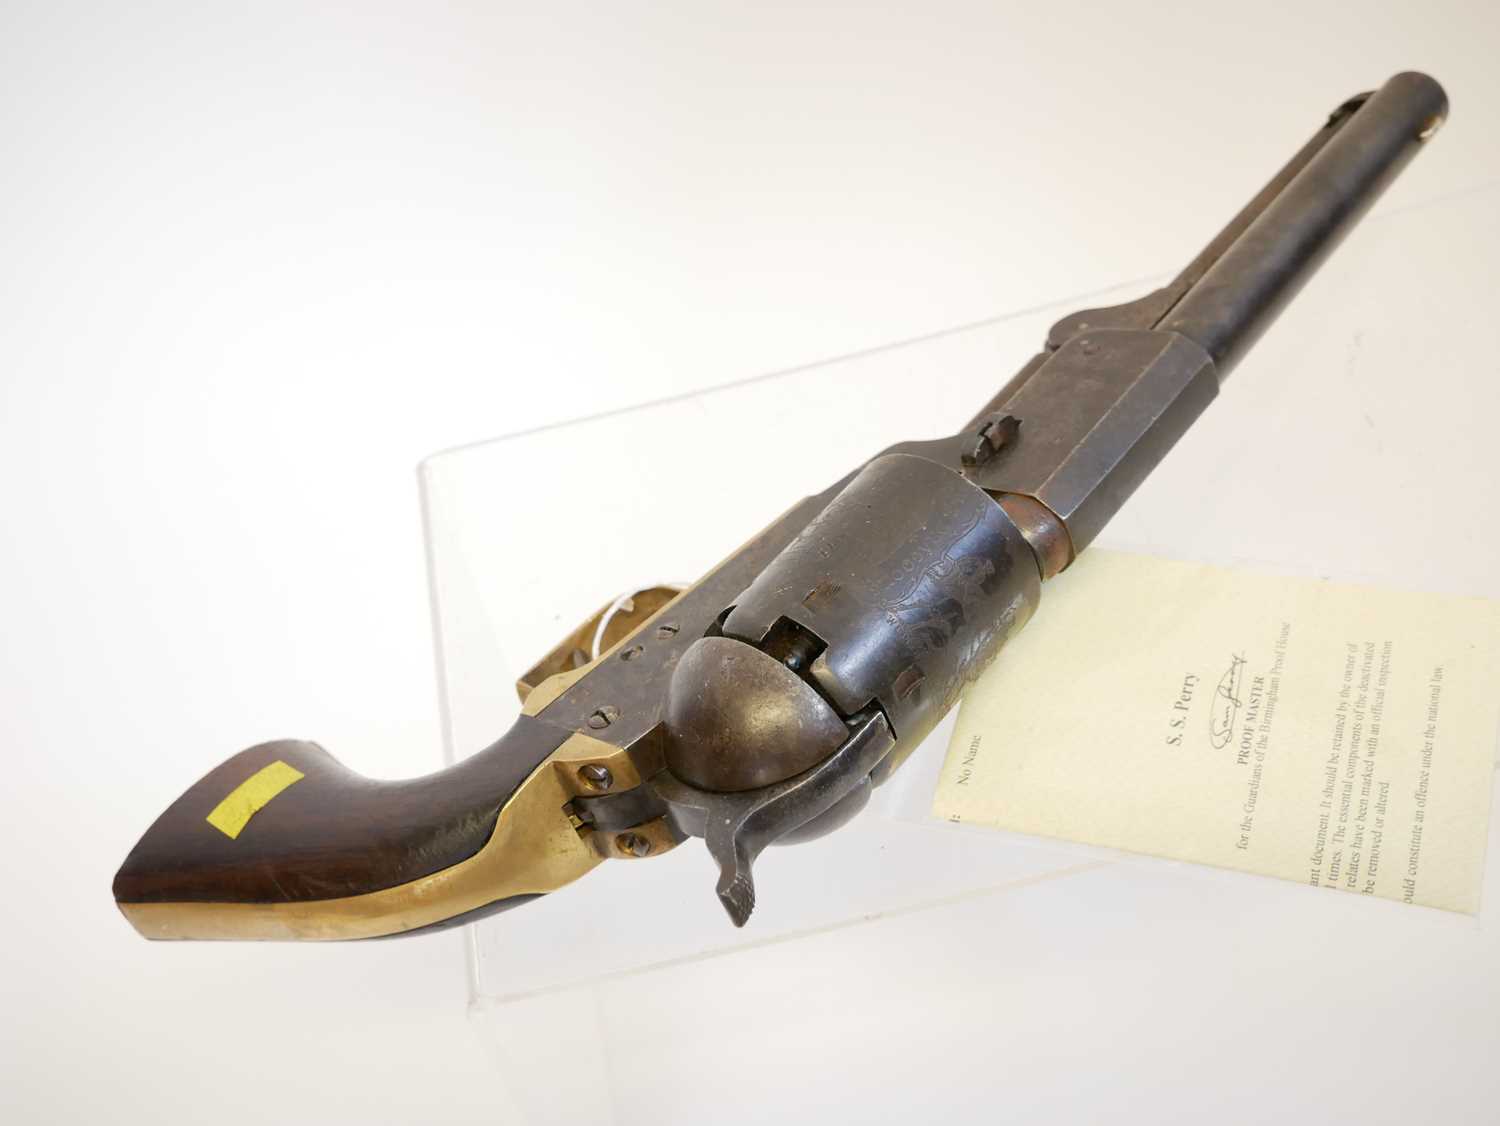 Deactivated Italian copy of a Colt dragoon, 7.5inch barrel, serial number 977, in oak case - Image 4 of 9